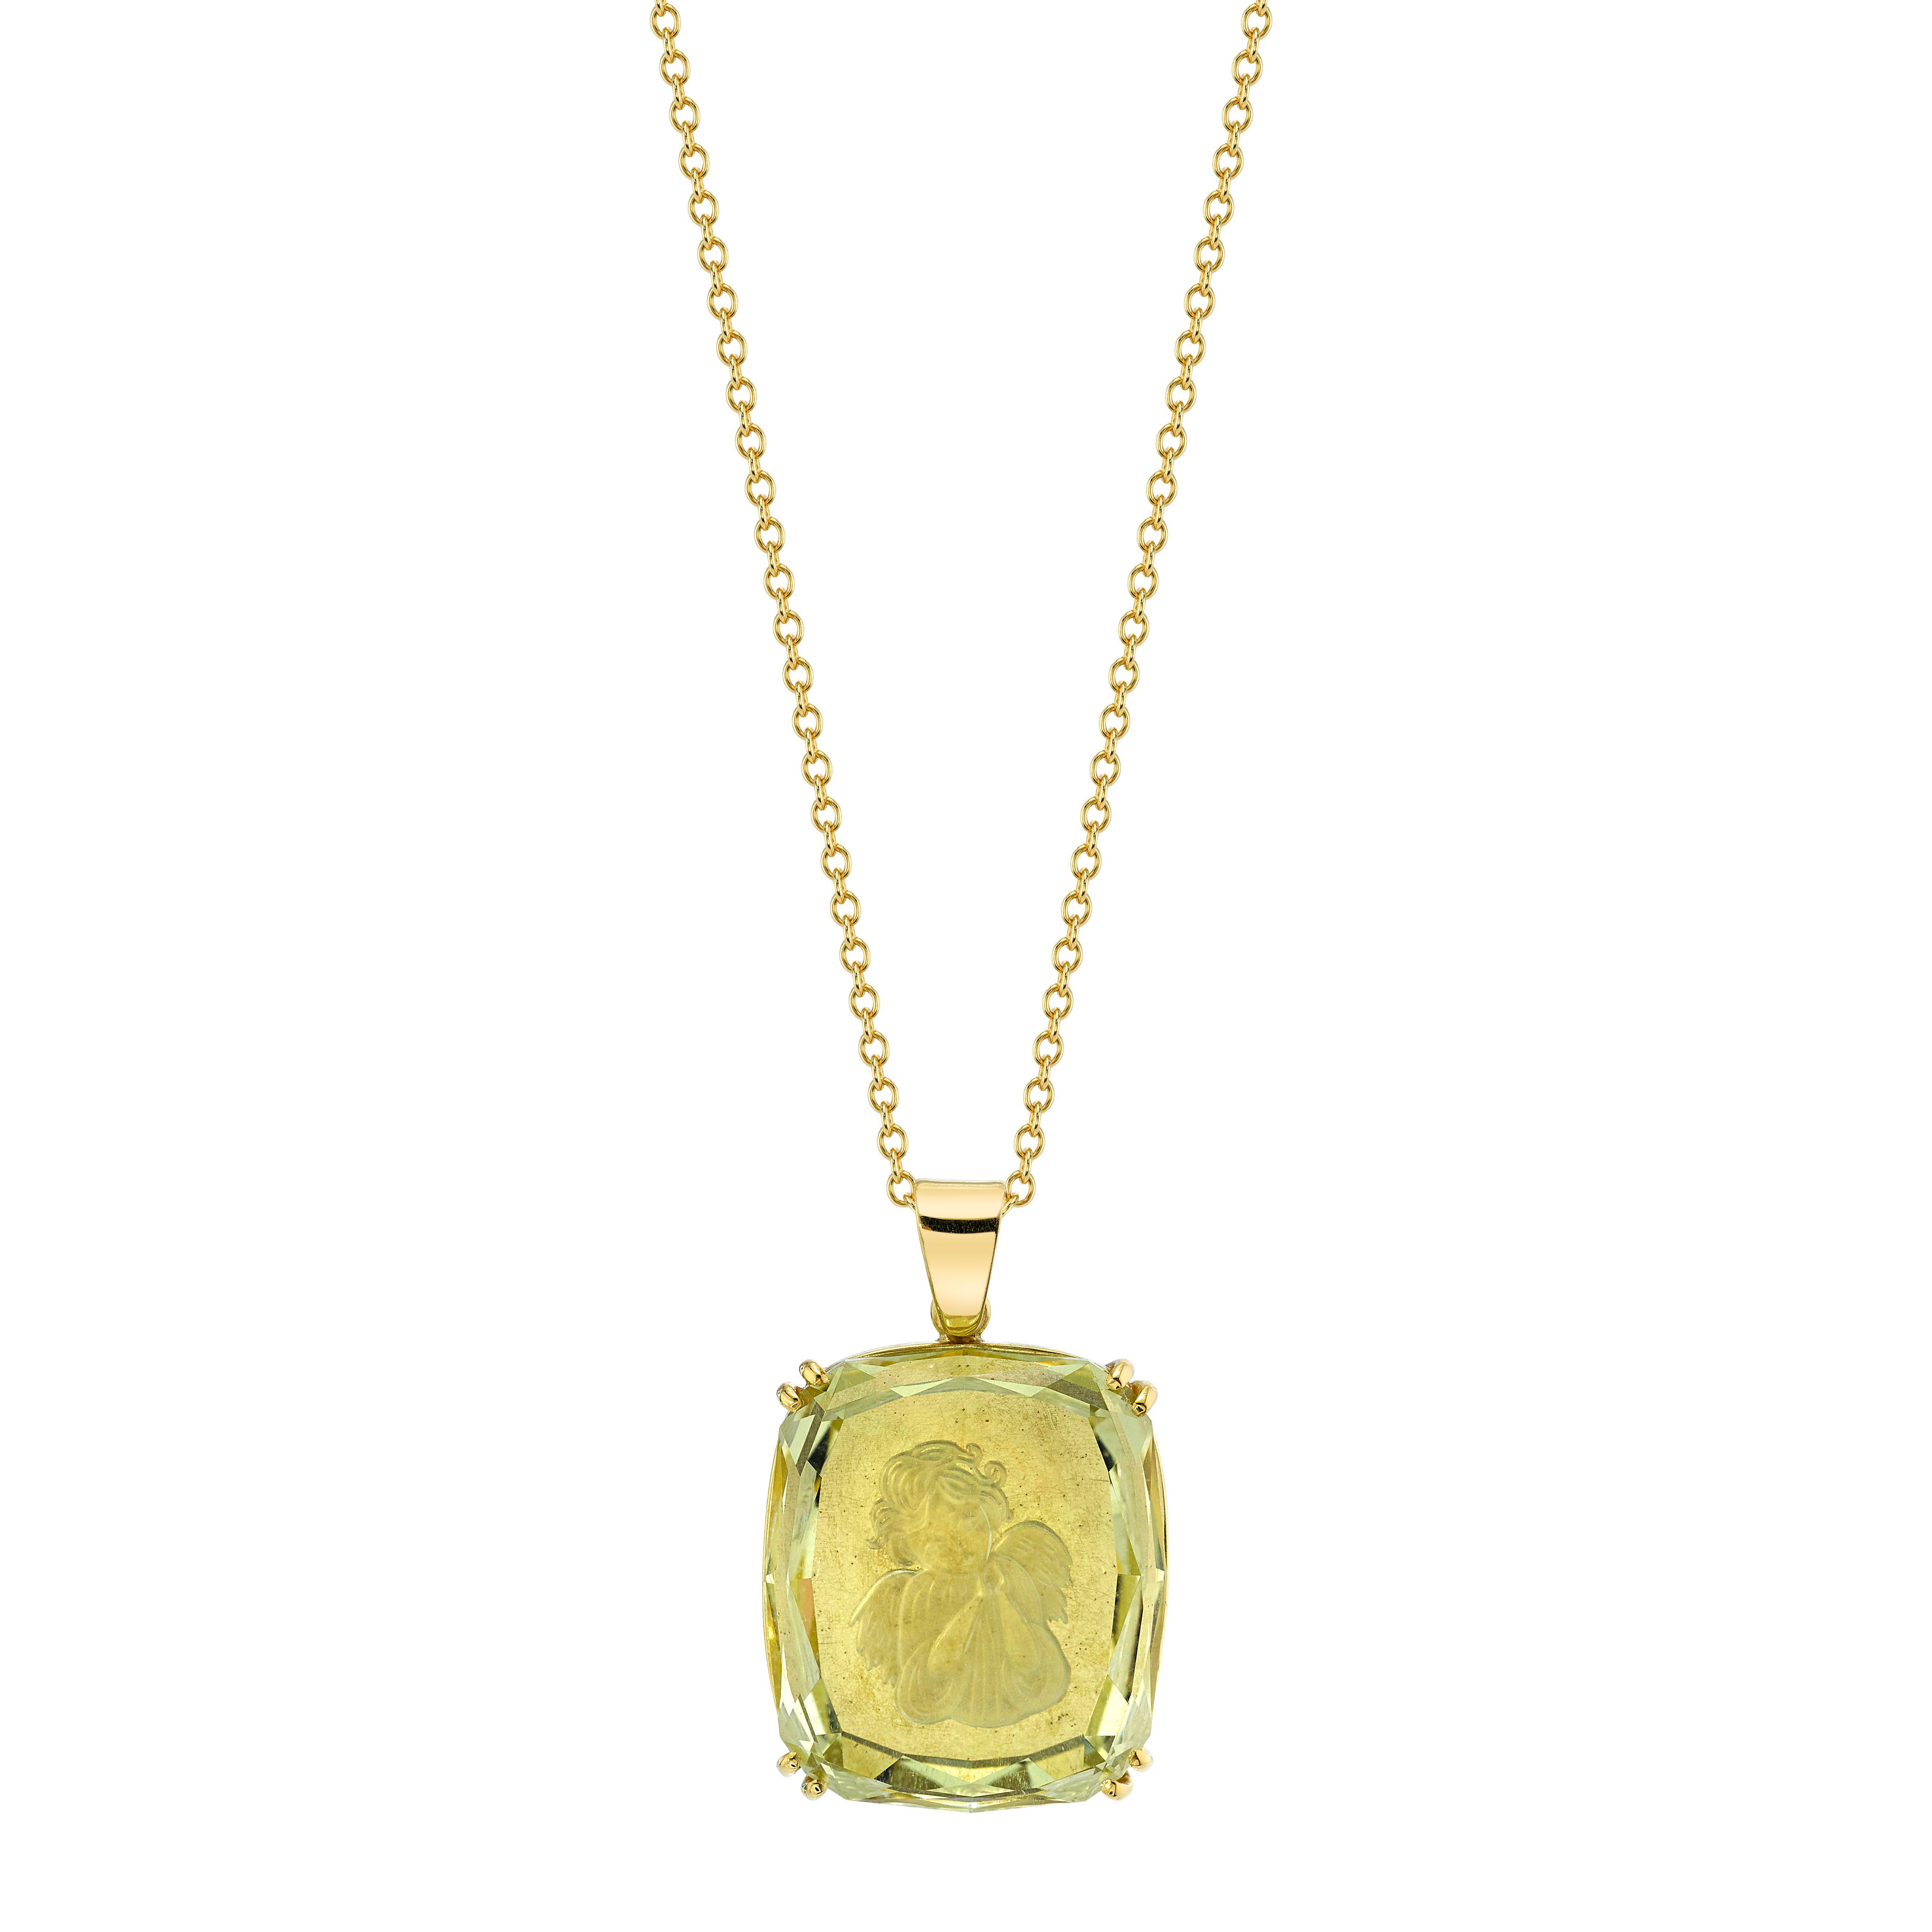 Angels are among us in this beautiful 18k yellow gold pendant featuring an exquisite, 25.49 carat golden beryl that has been carved with an angel in a reverse intaglio. This gem was carved in Russia and measures almost an inch in length. The